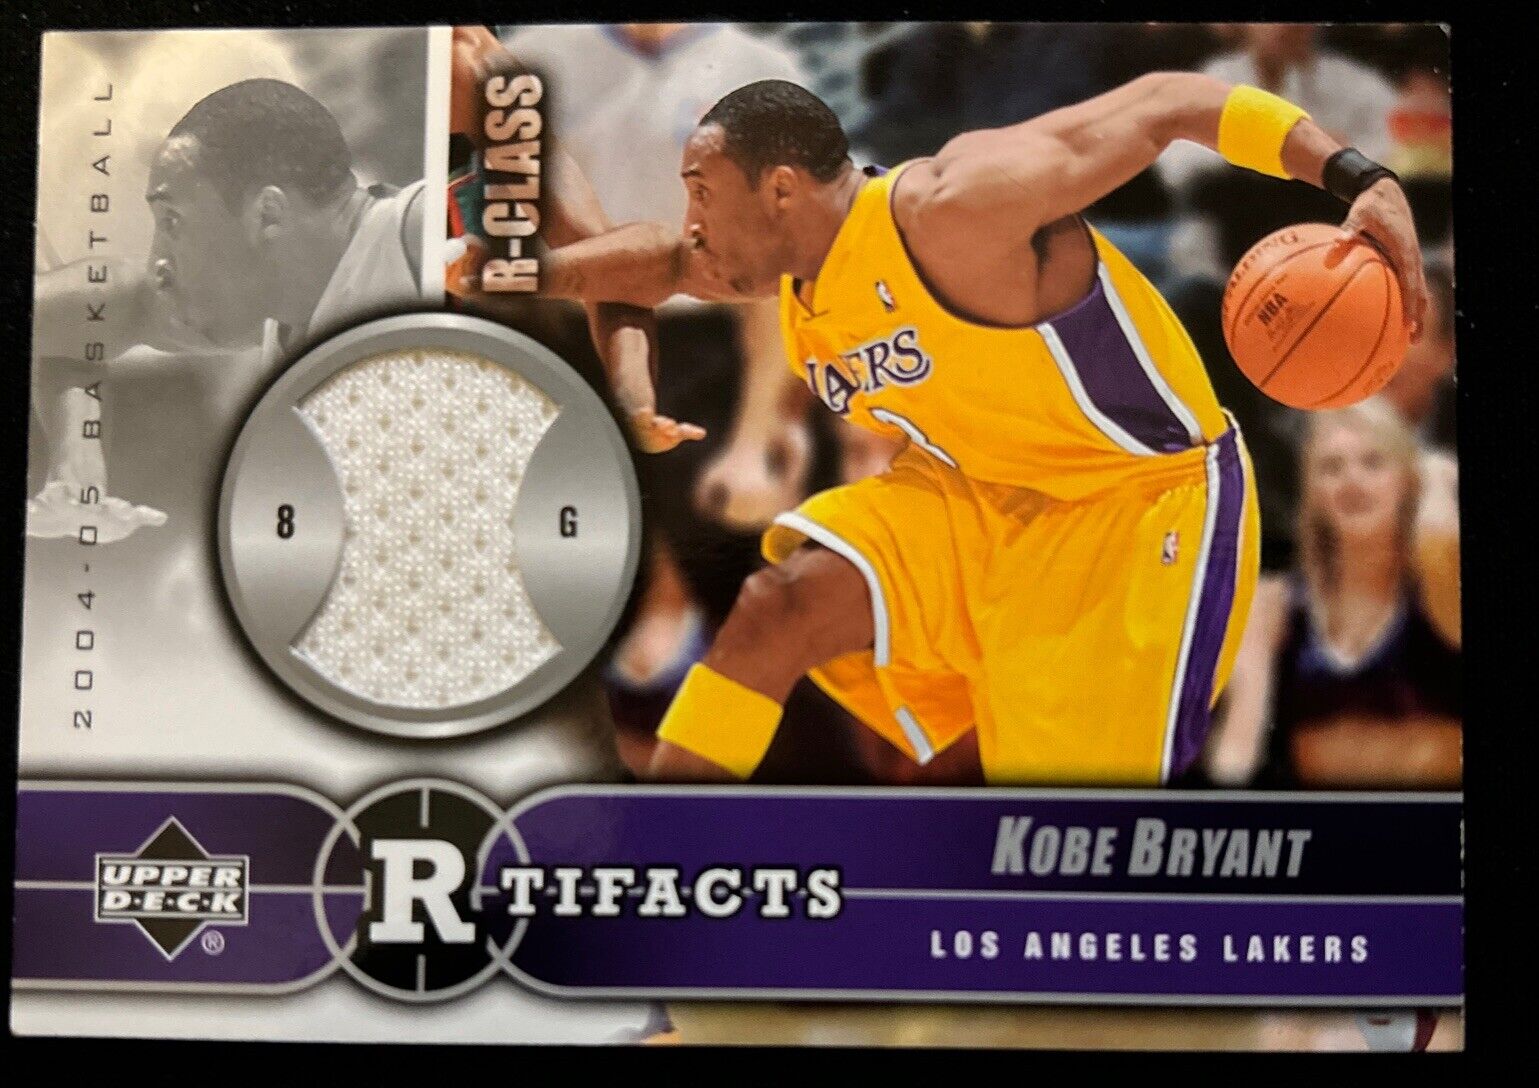 Kobe Bryant Upper Deck Rtifacts-RCR-KB 2004-05 Relic Game Used